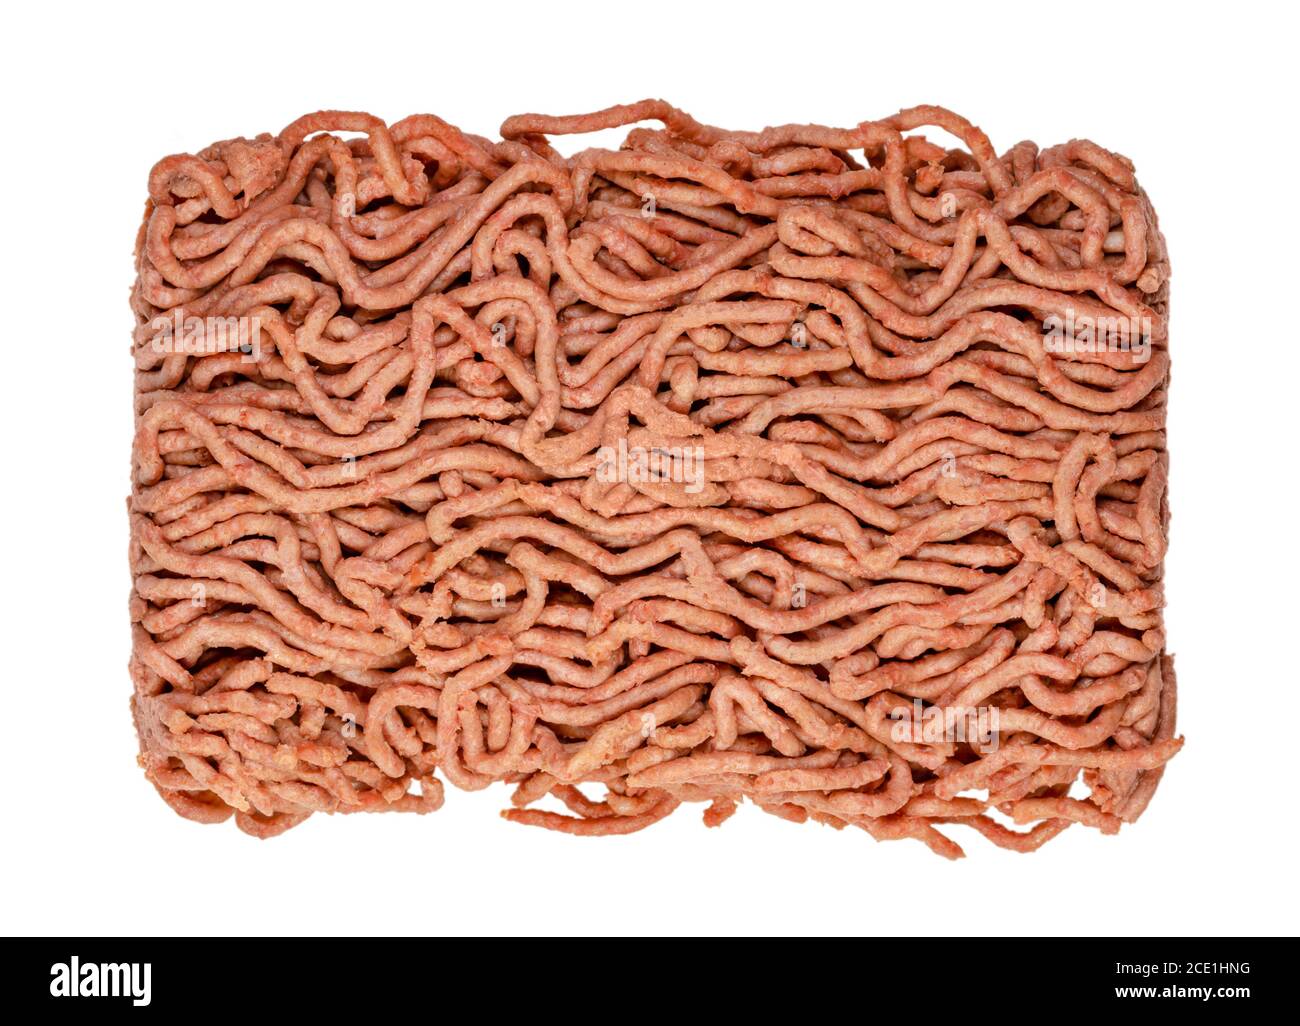 Vegan ground meat from above, isolated on white background. Substitute for minced meat based on pea protein, driven through the meat grinder. Stock Photo